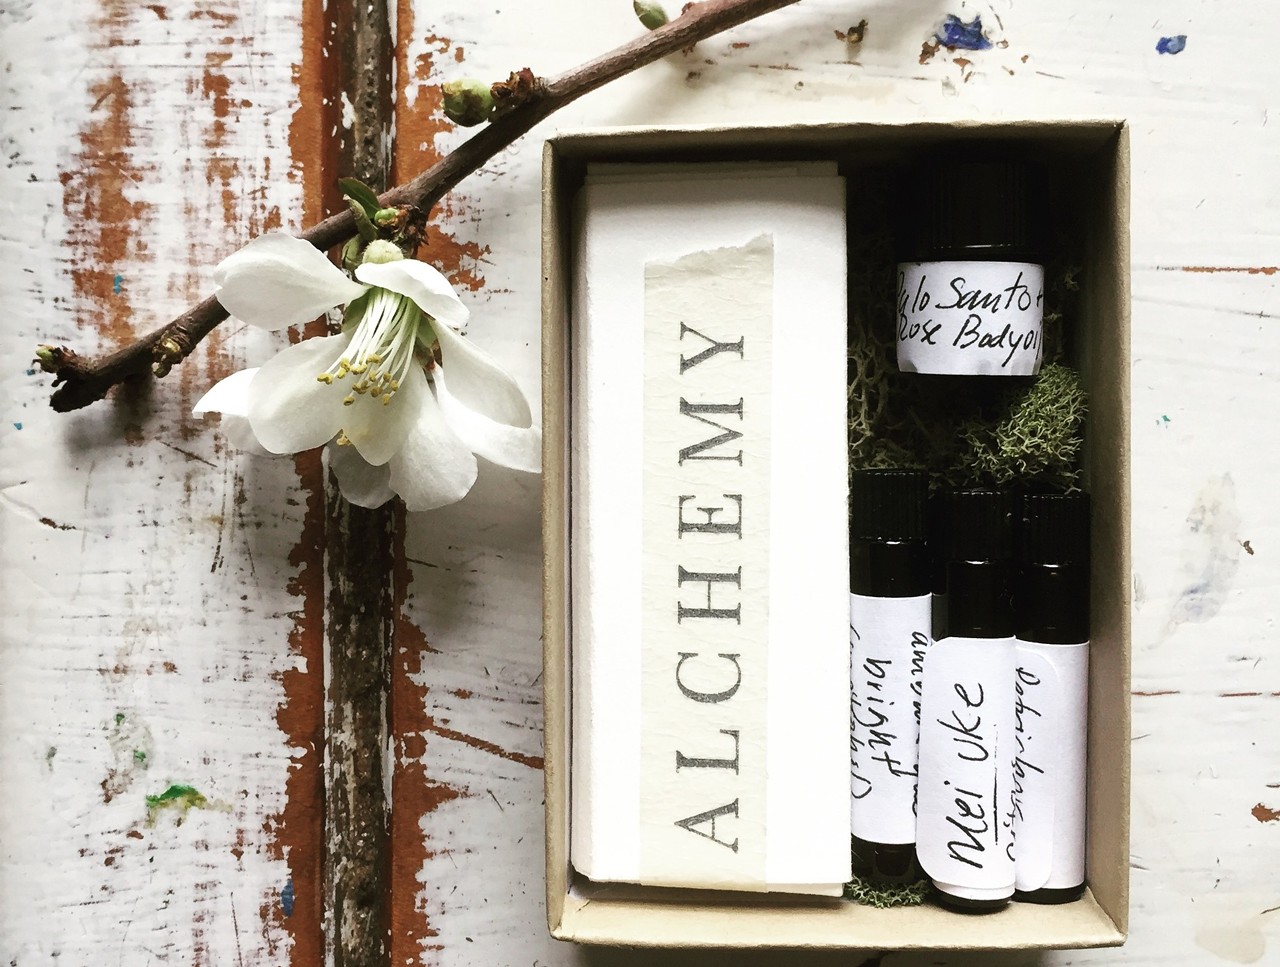 Alchemy
Have a prenuptial pampering session. Alchemy Henna offers plant-based facials, skin care products and artisan perfumes to help you get pampered before the big day.